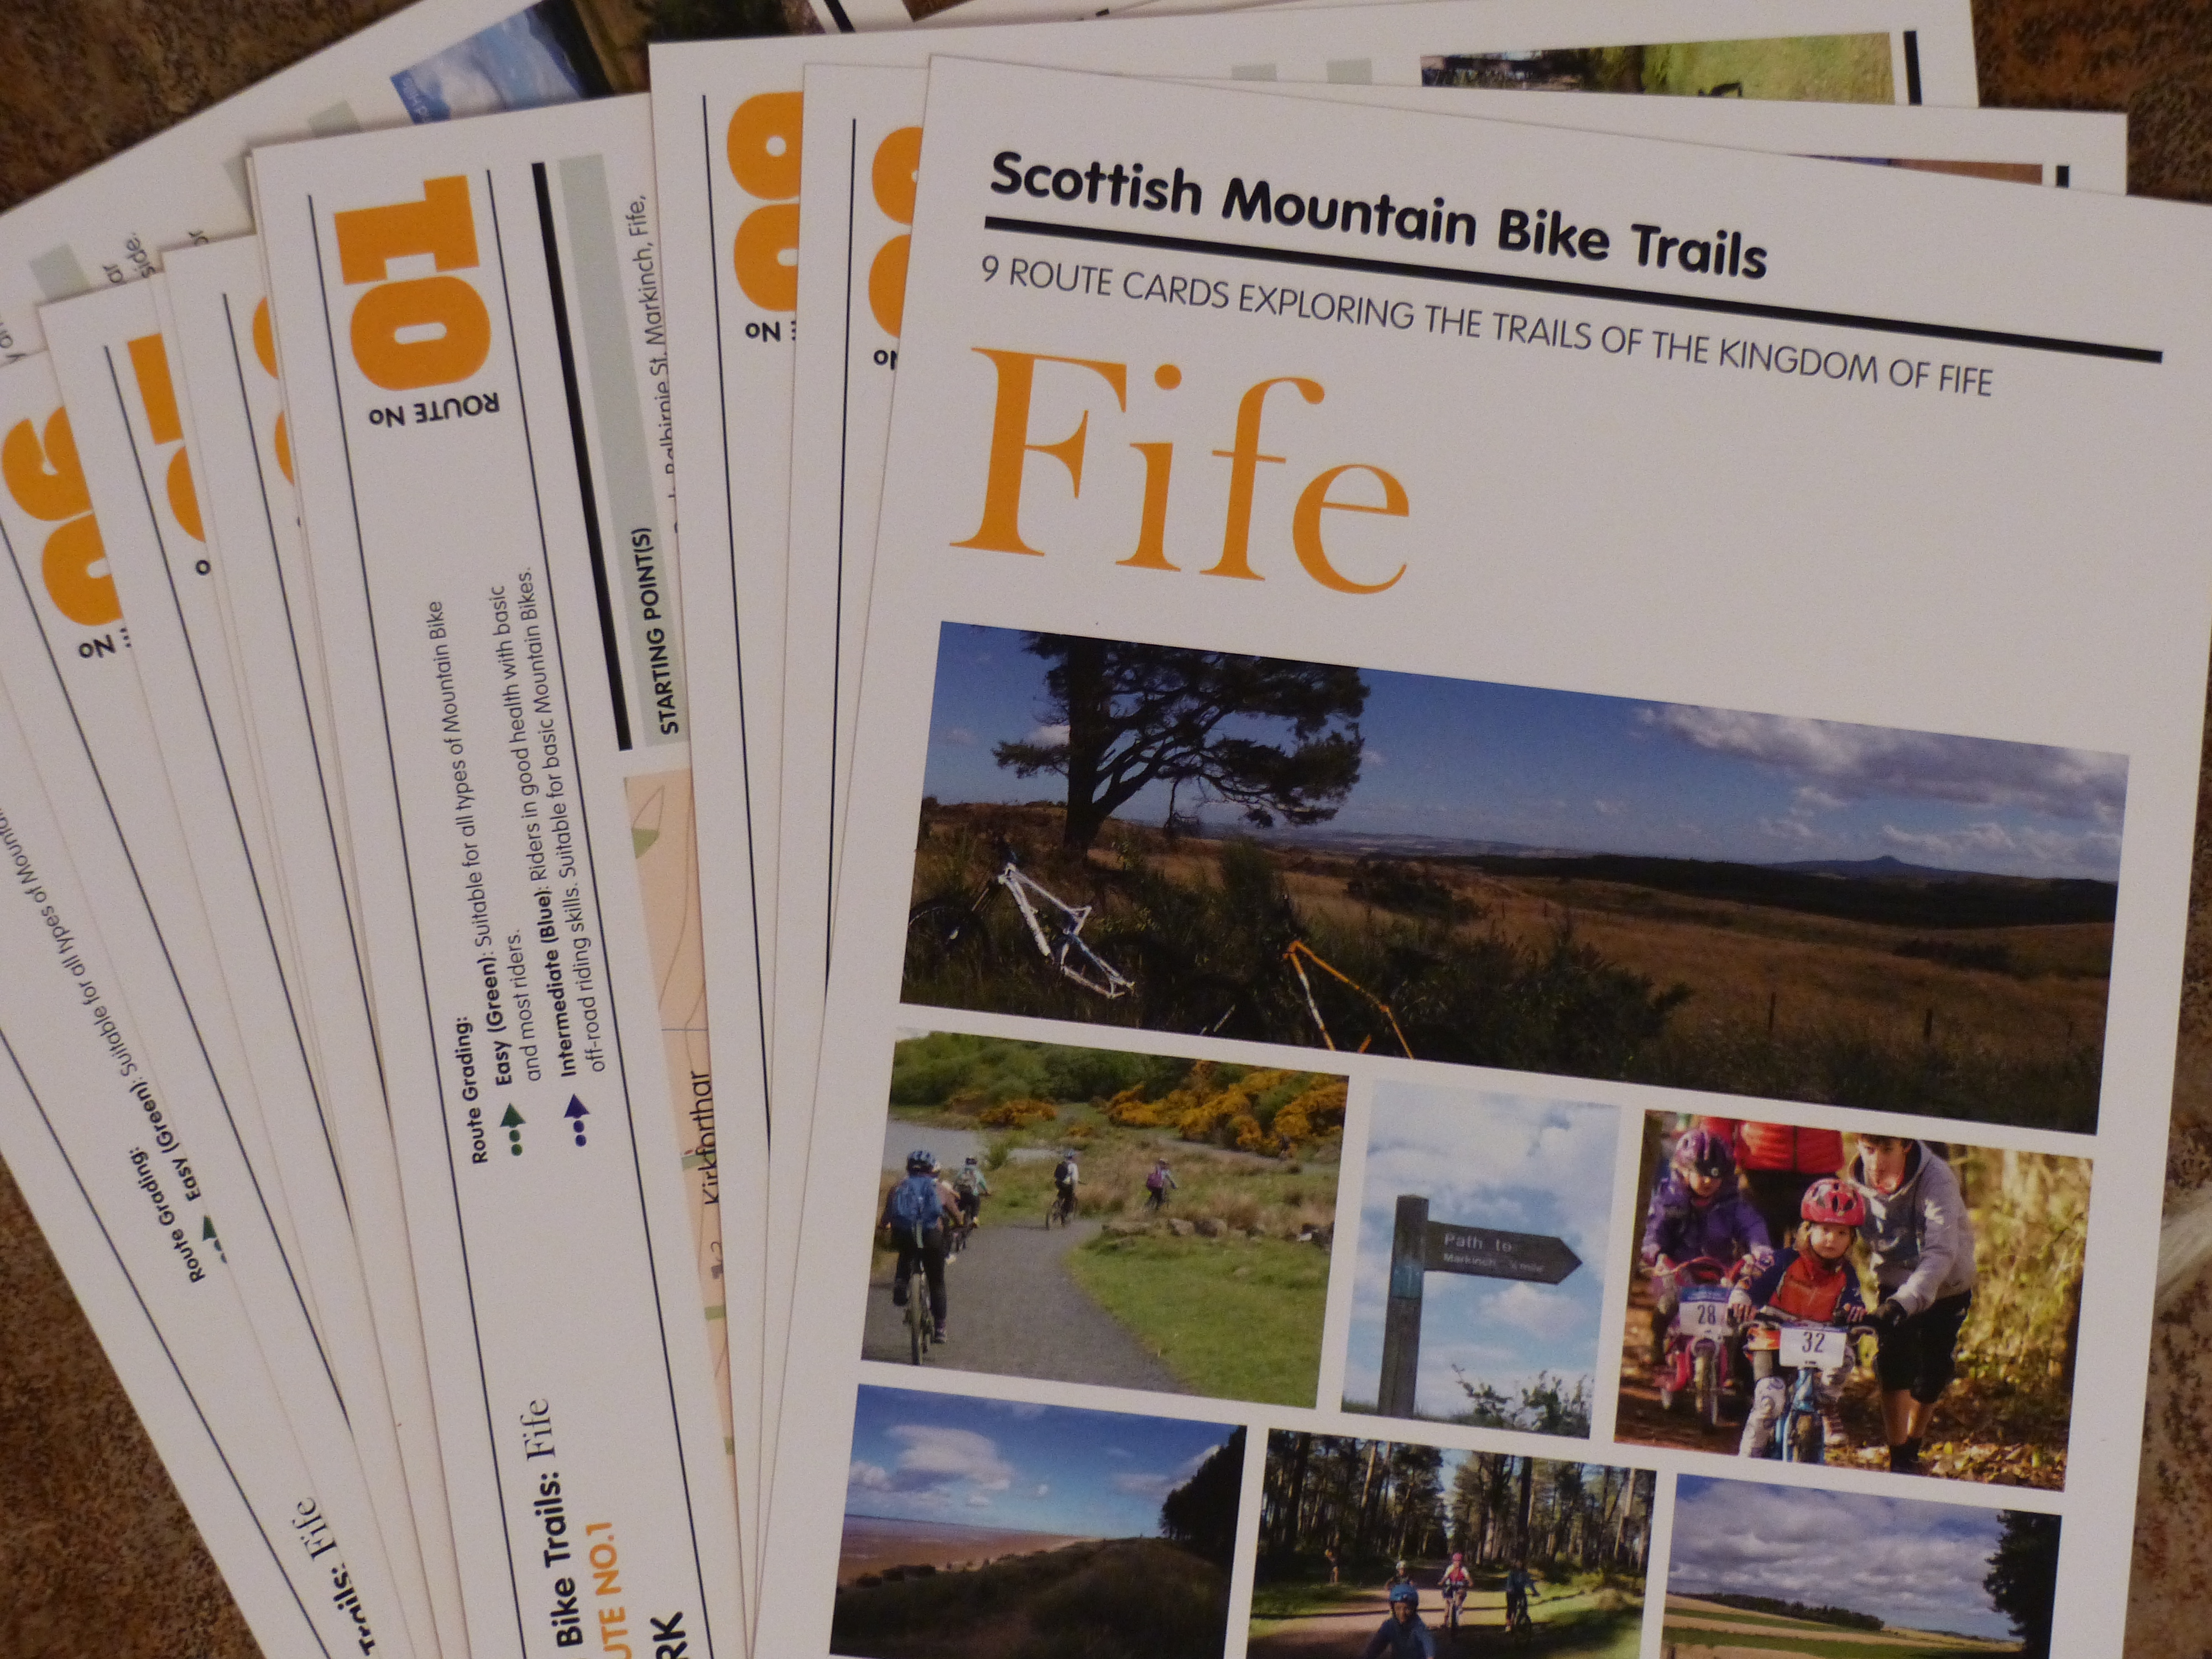 Leaflets for cycling routes in Fife